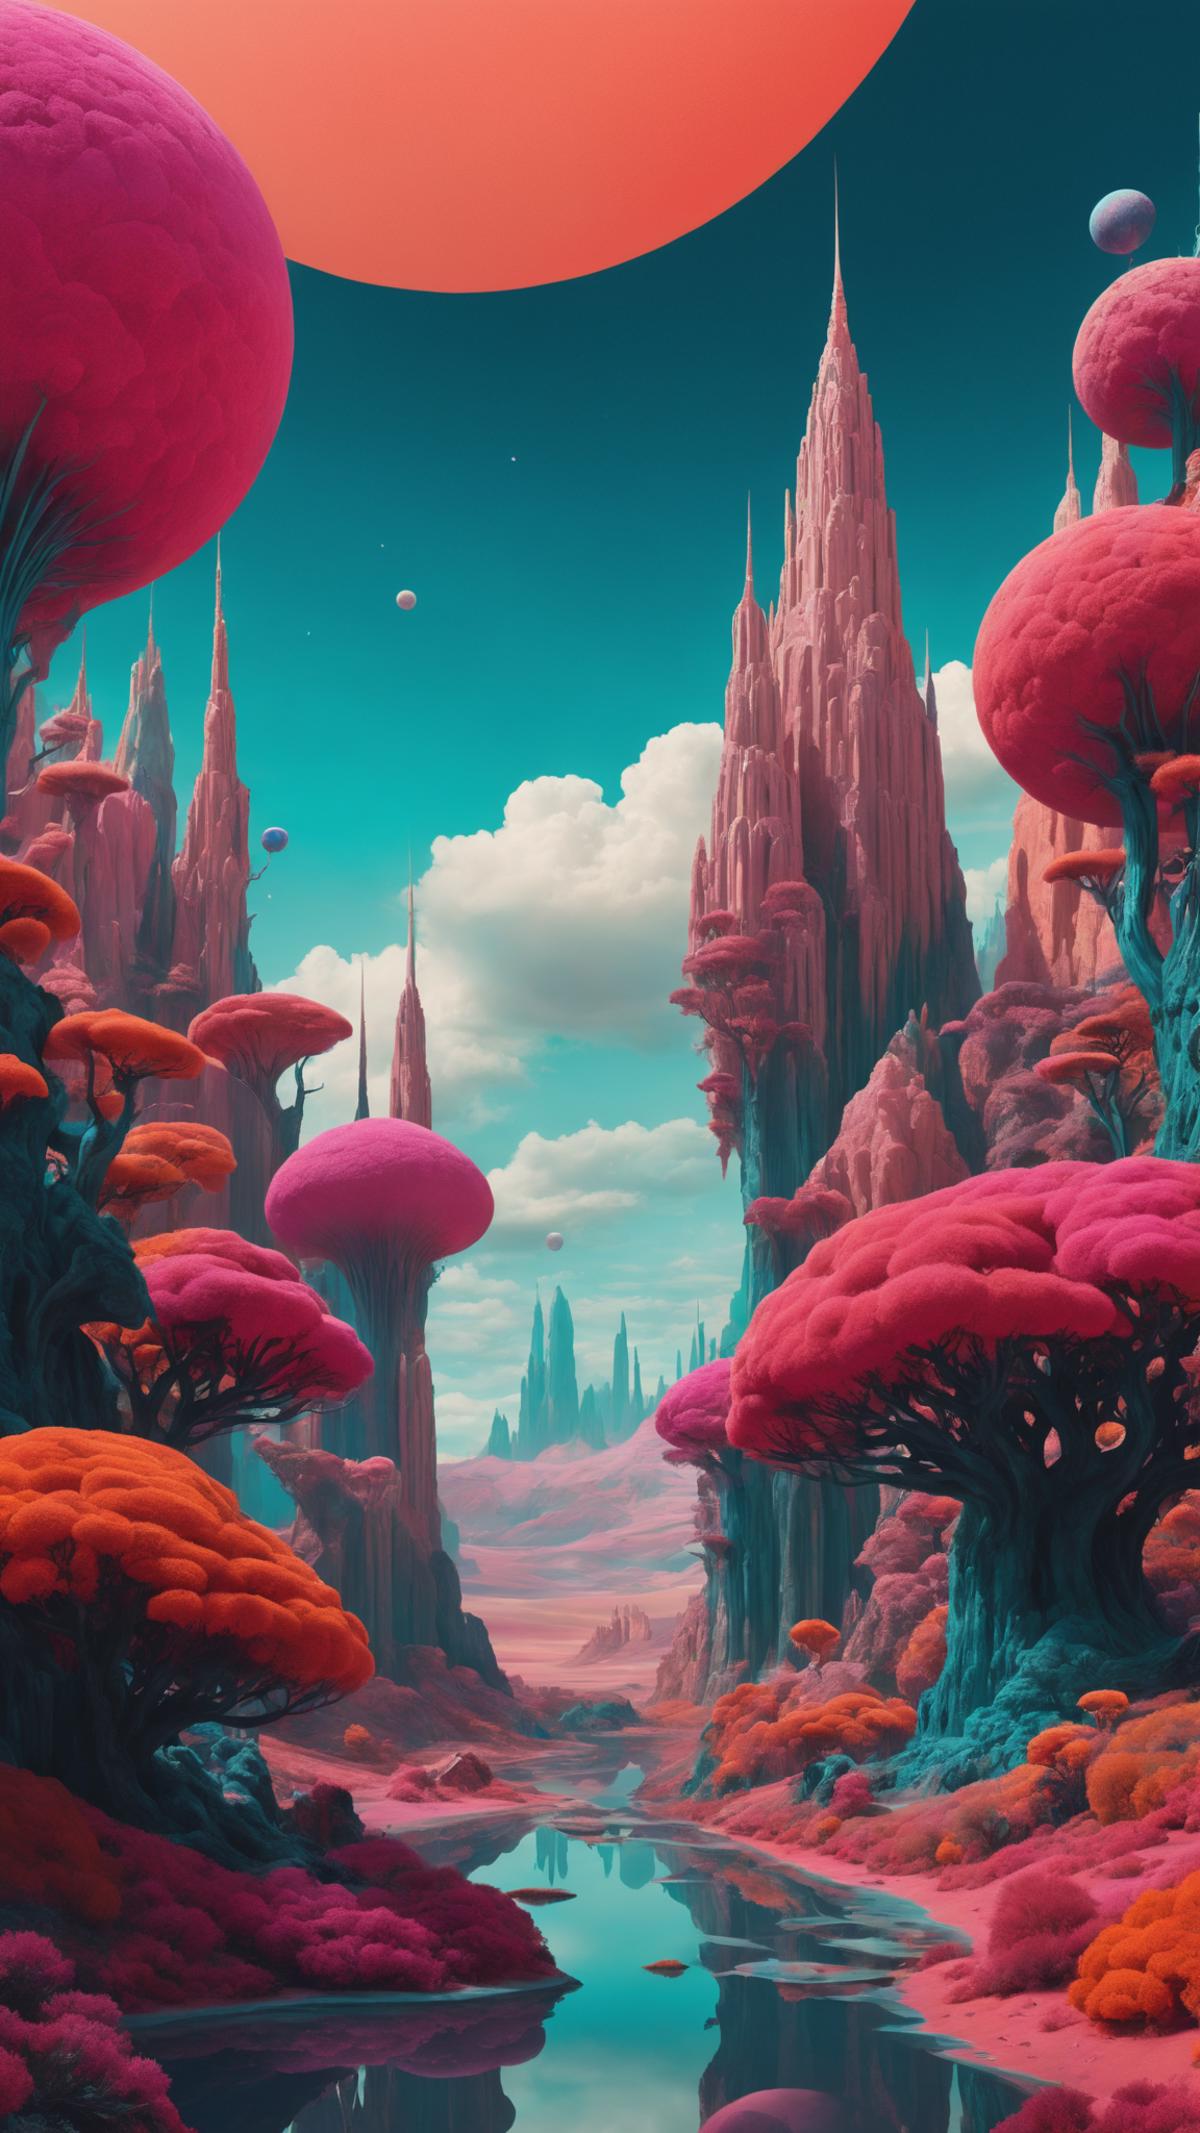 A surreal landscape featuring pink and purple mushrooms and towers.